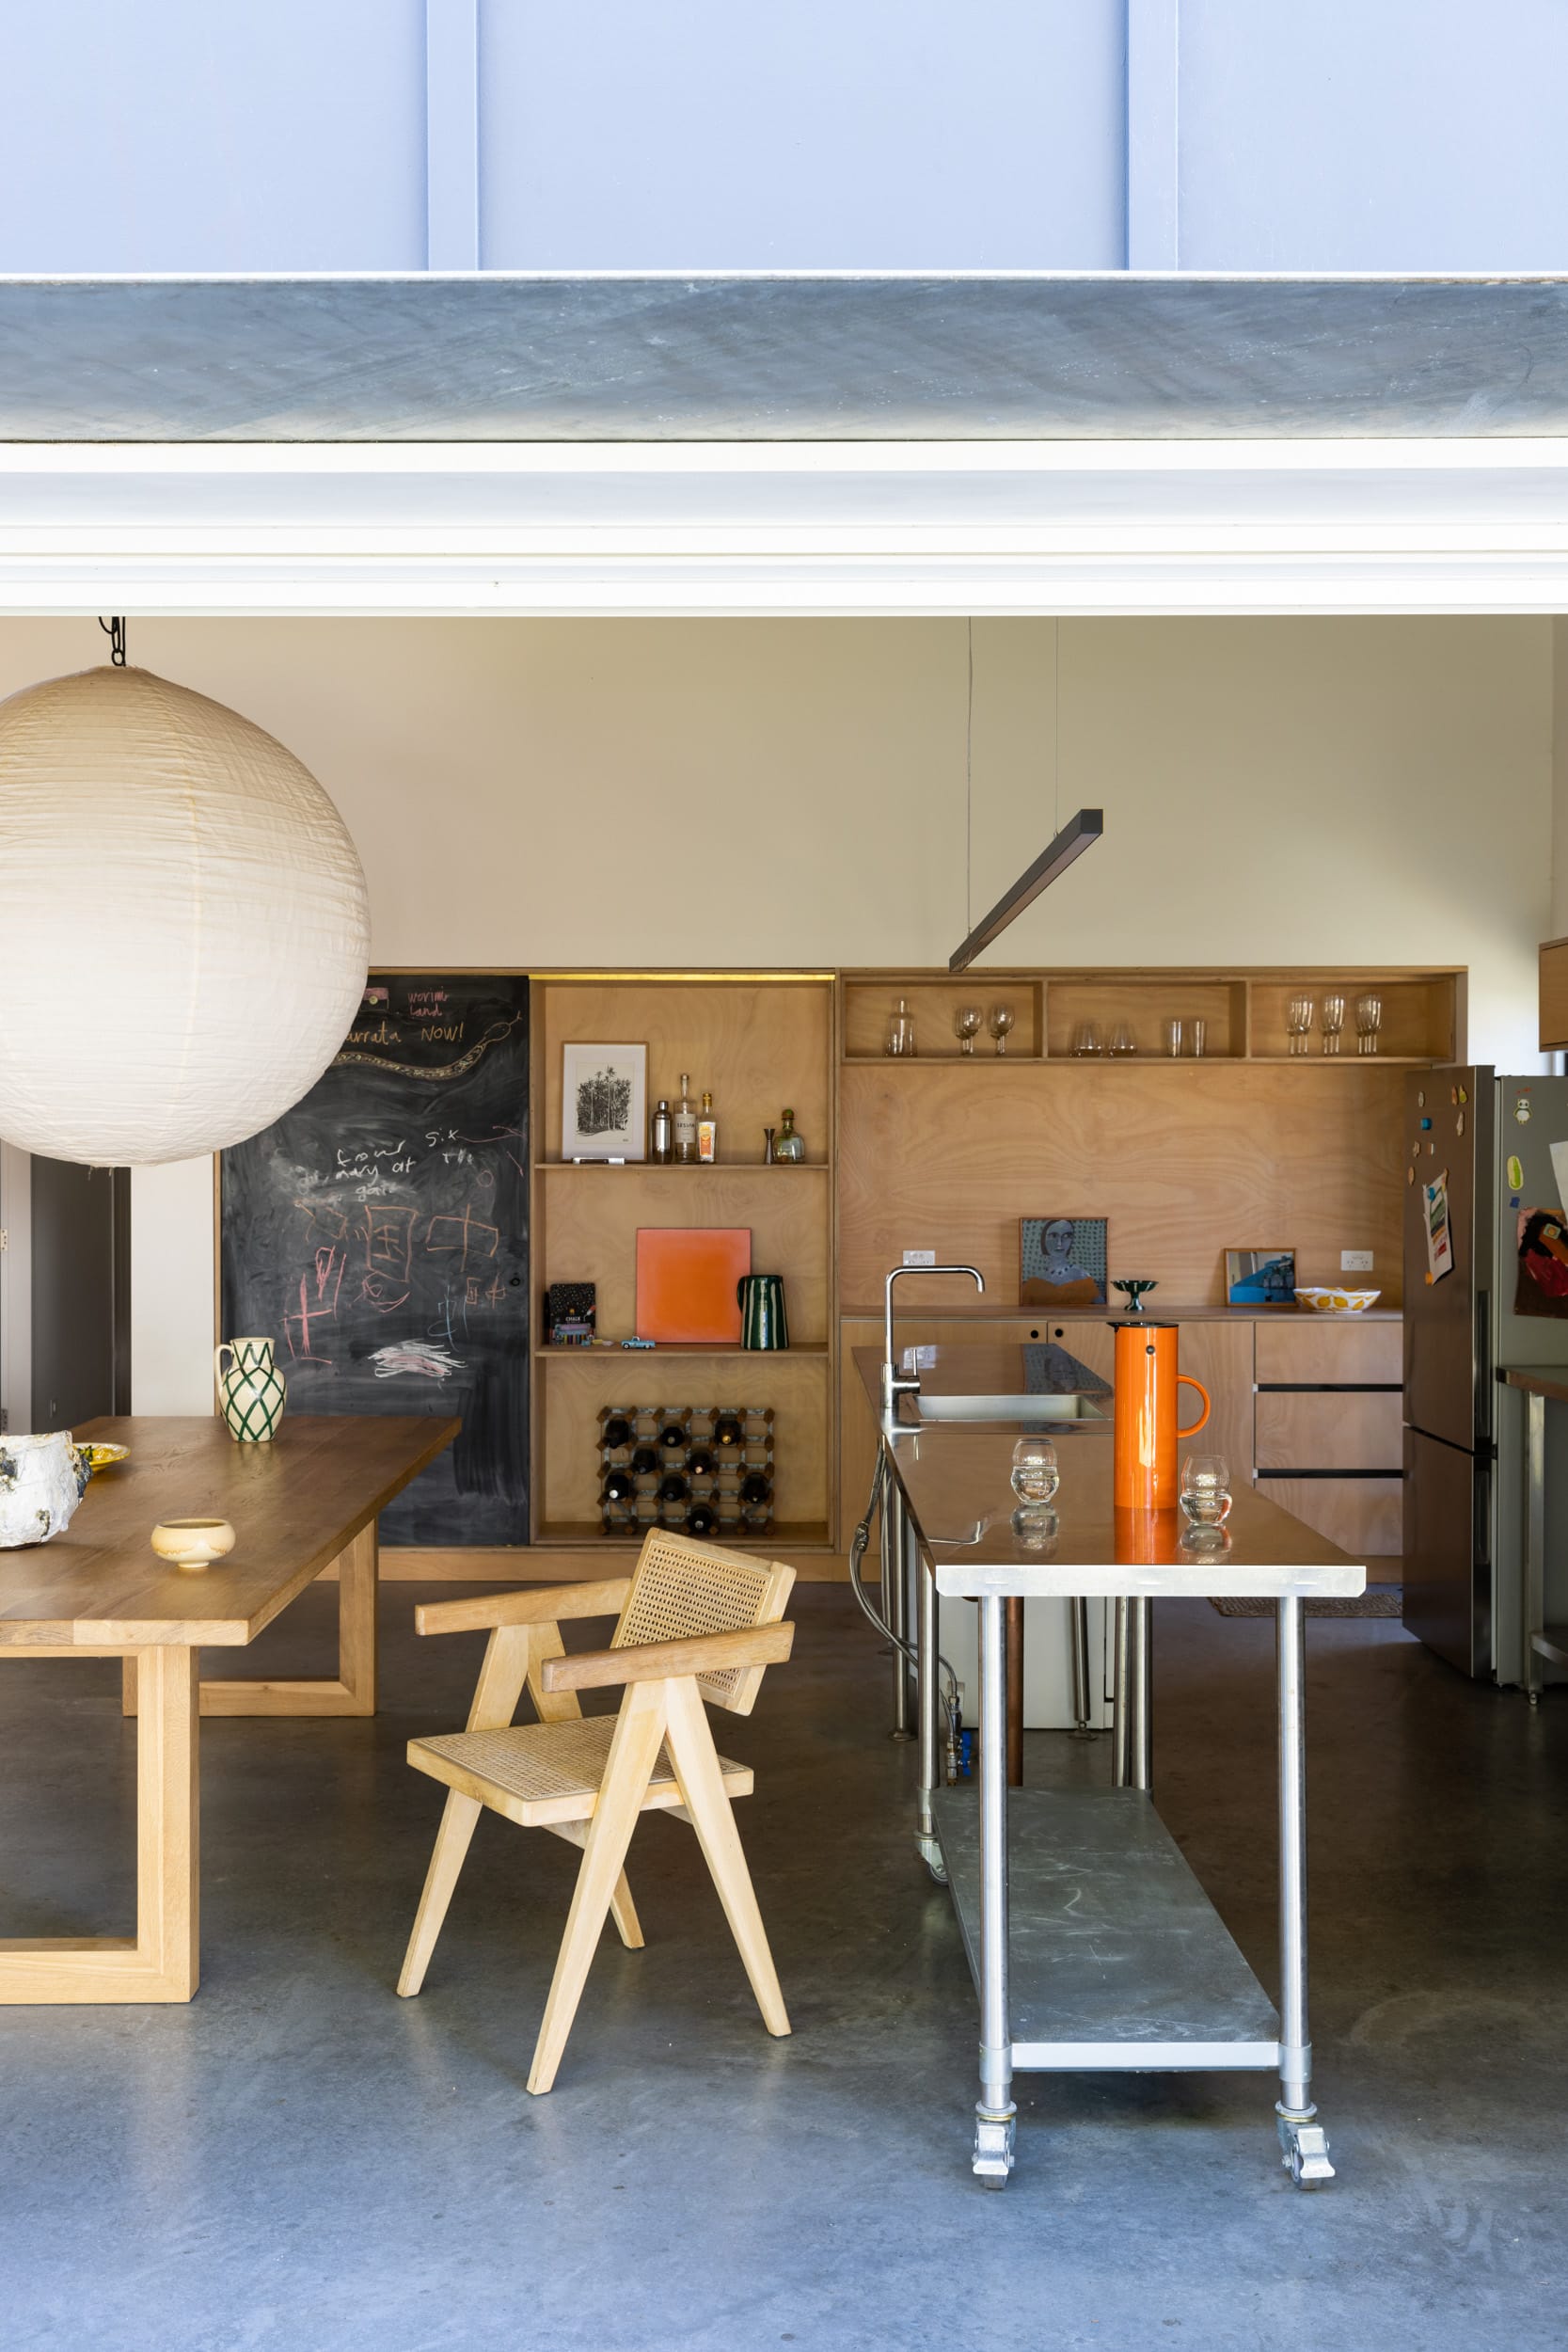 Drip-Dry House by Marker Architecture & Design. An interior shot of the industrial style kitchen and dining table with a large pendant light over